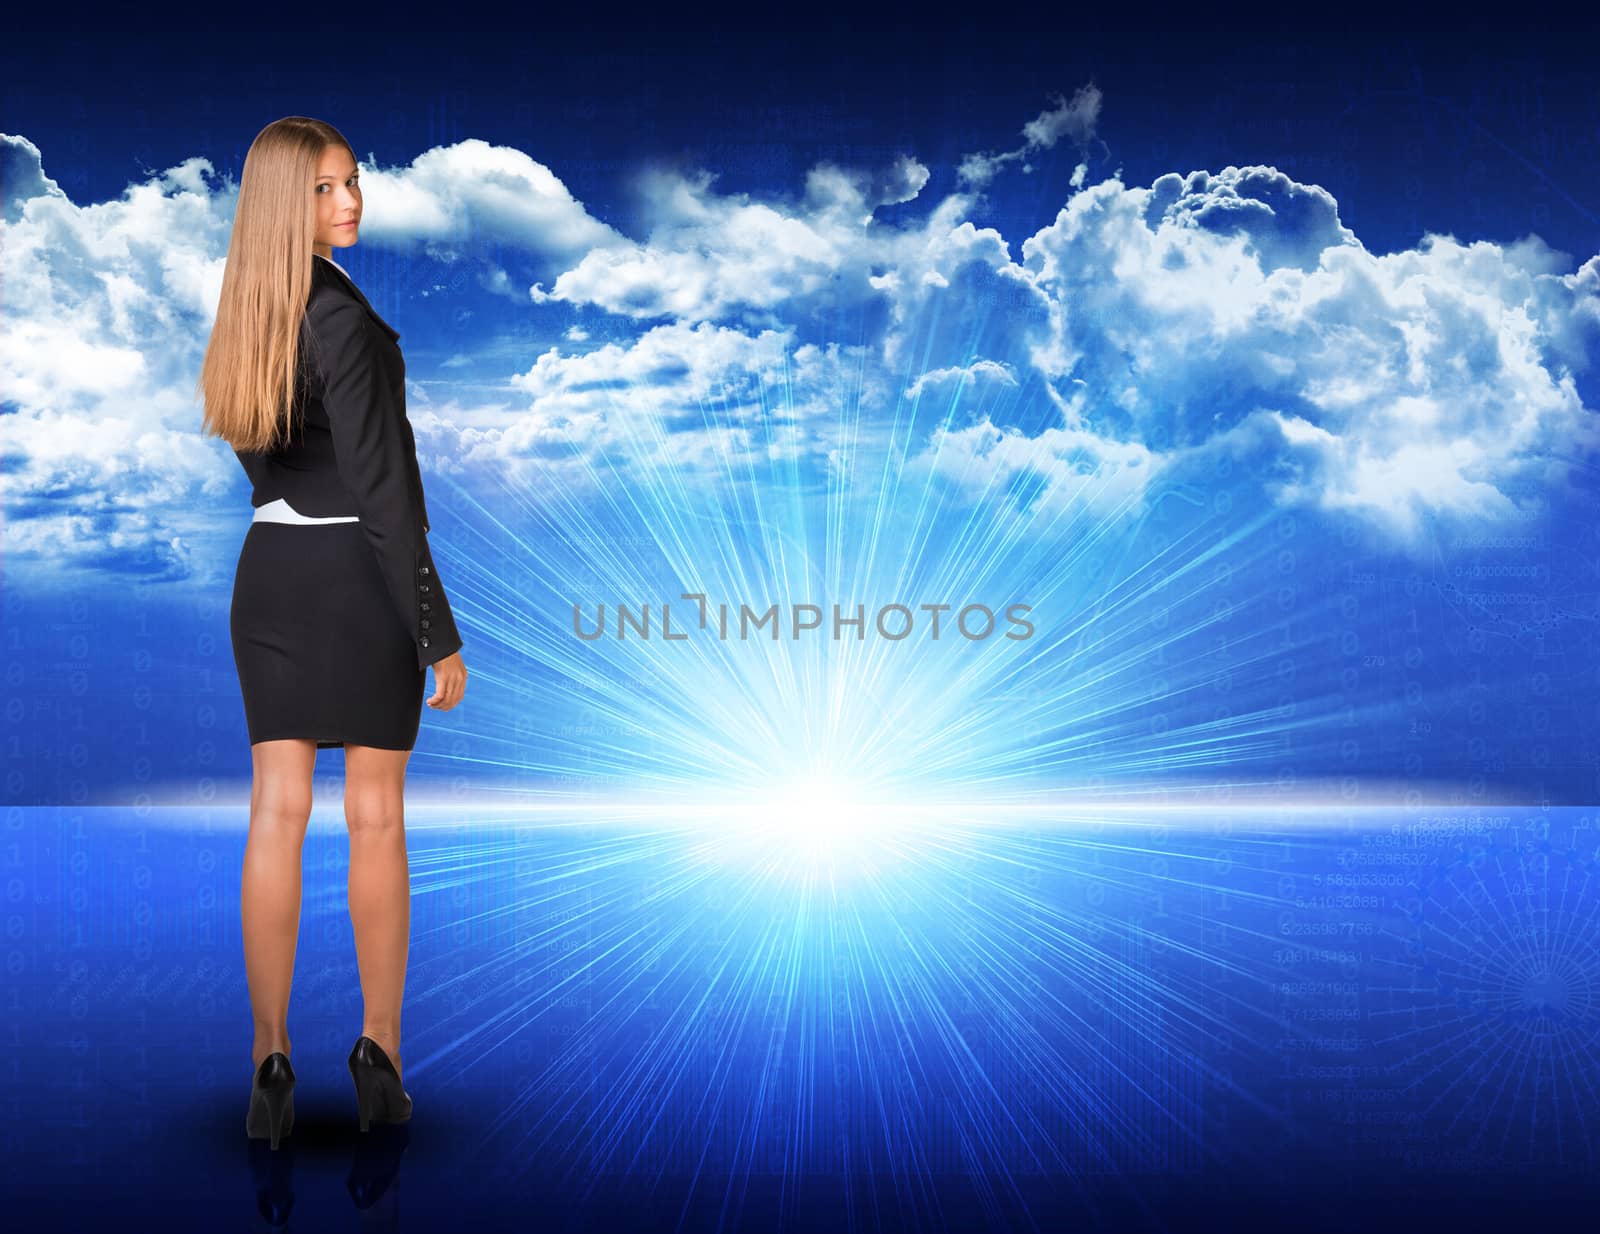 Businesswoman standing against digitally generated spacy blue landscape with rising sun and cloudy sky, looking back over her shoulder